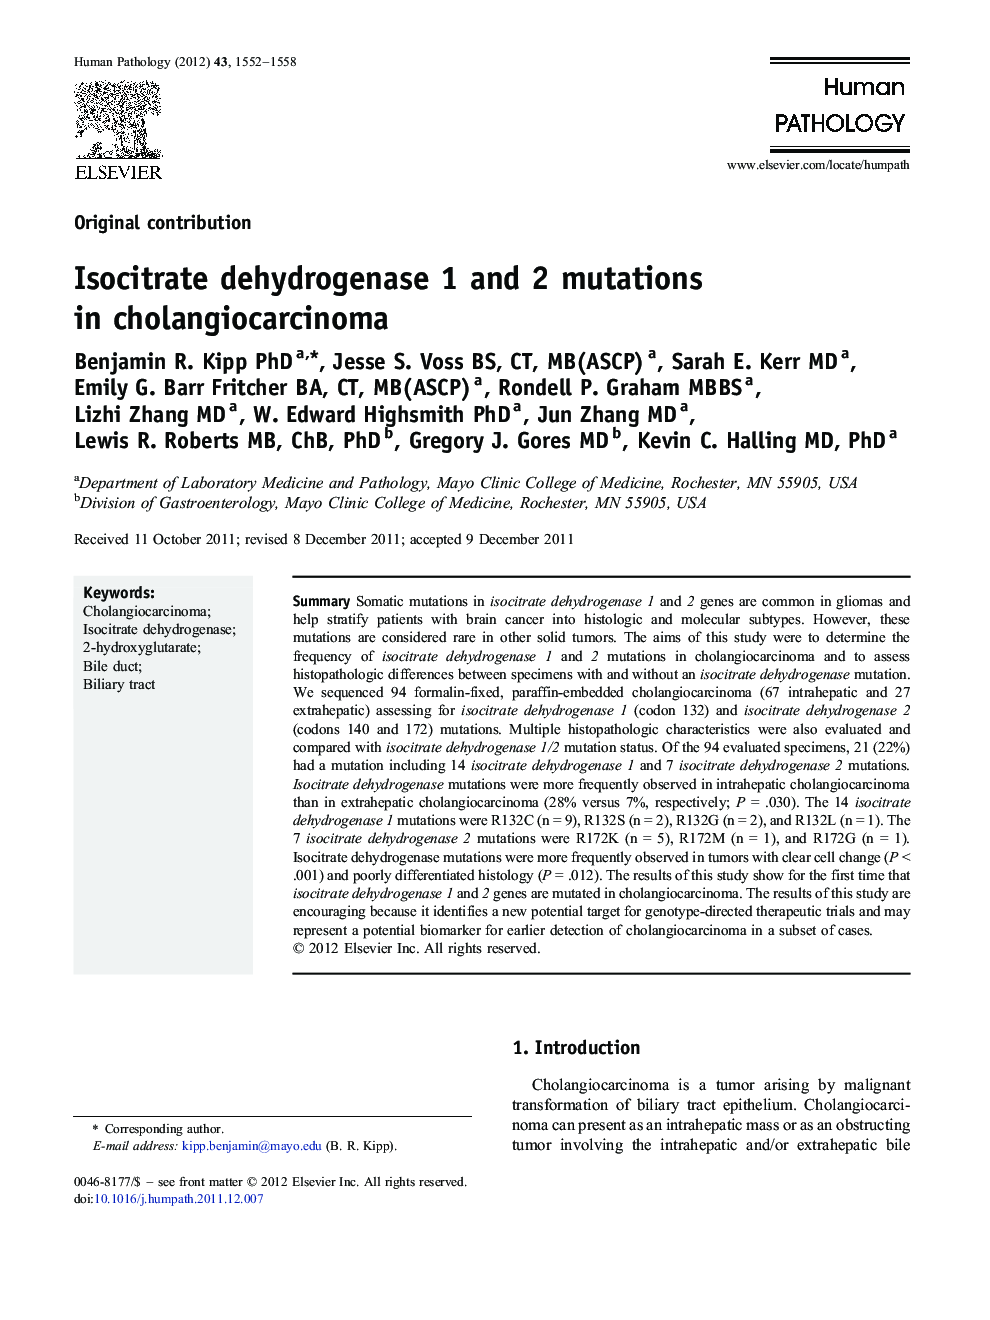 Isocitrate dehydrogenase 1 and 2 mutations in cholangiocarcinoma